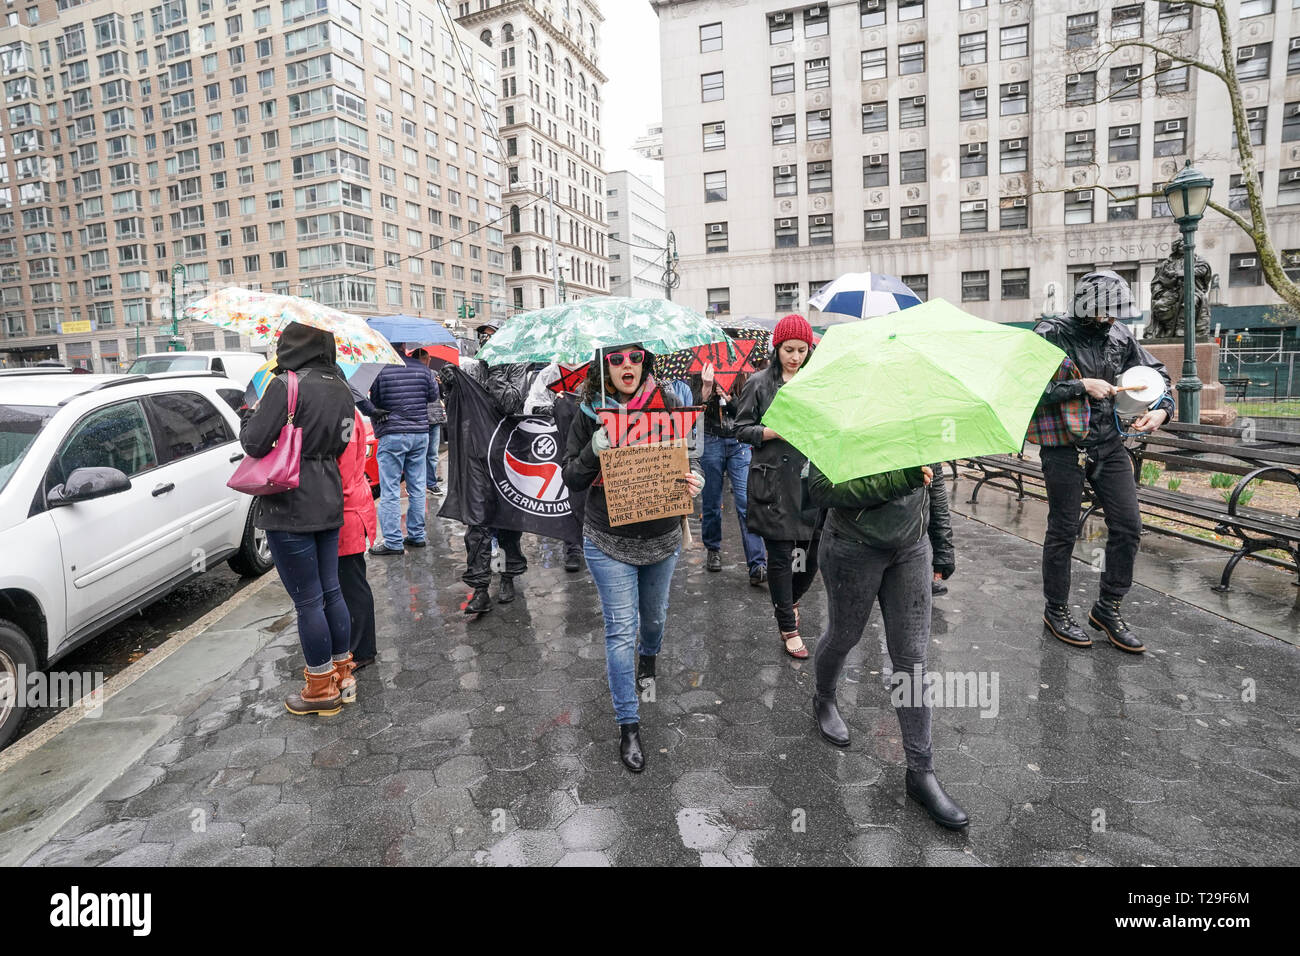 New York, United States. 31st Mar, 2019. New York, NY - March 31, 2019: Rise and Resist members hold rally Against Hate and Holocaust Revisionism as counter protest for rally organized by Polish Americans at Federal Plaza Credit: lev radin/Alamy Live News Stock Photo